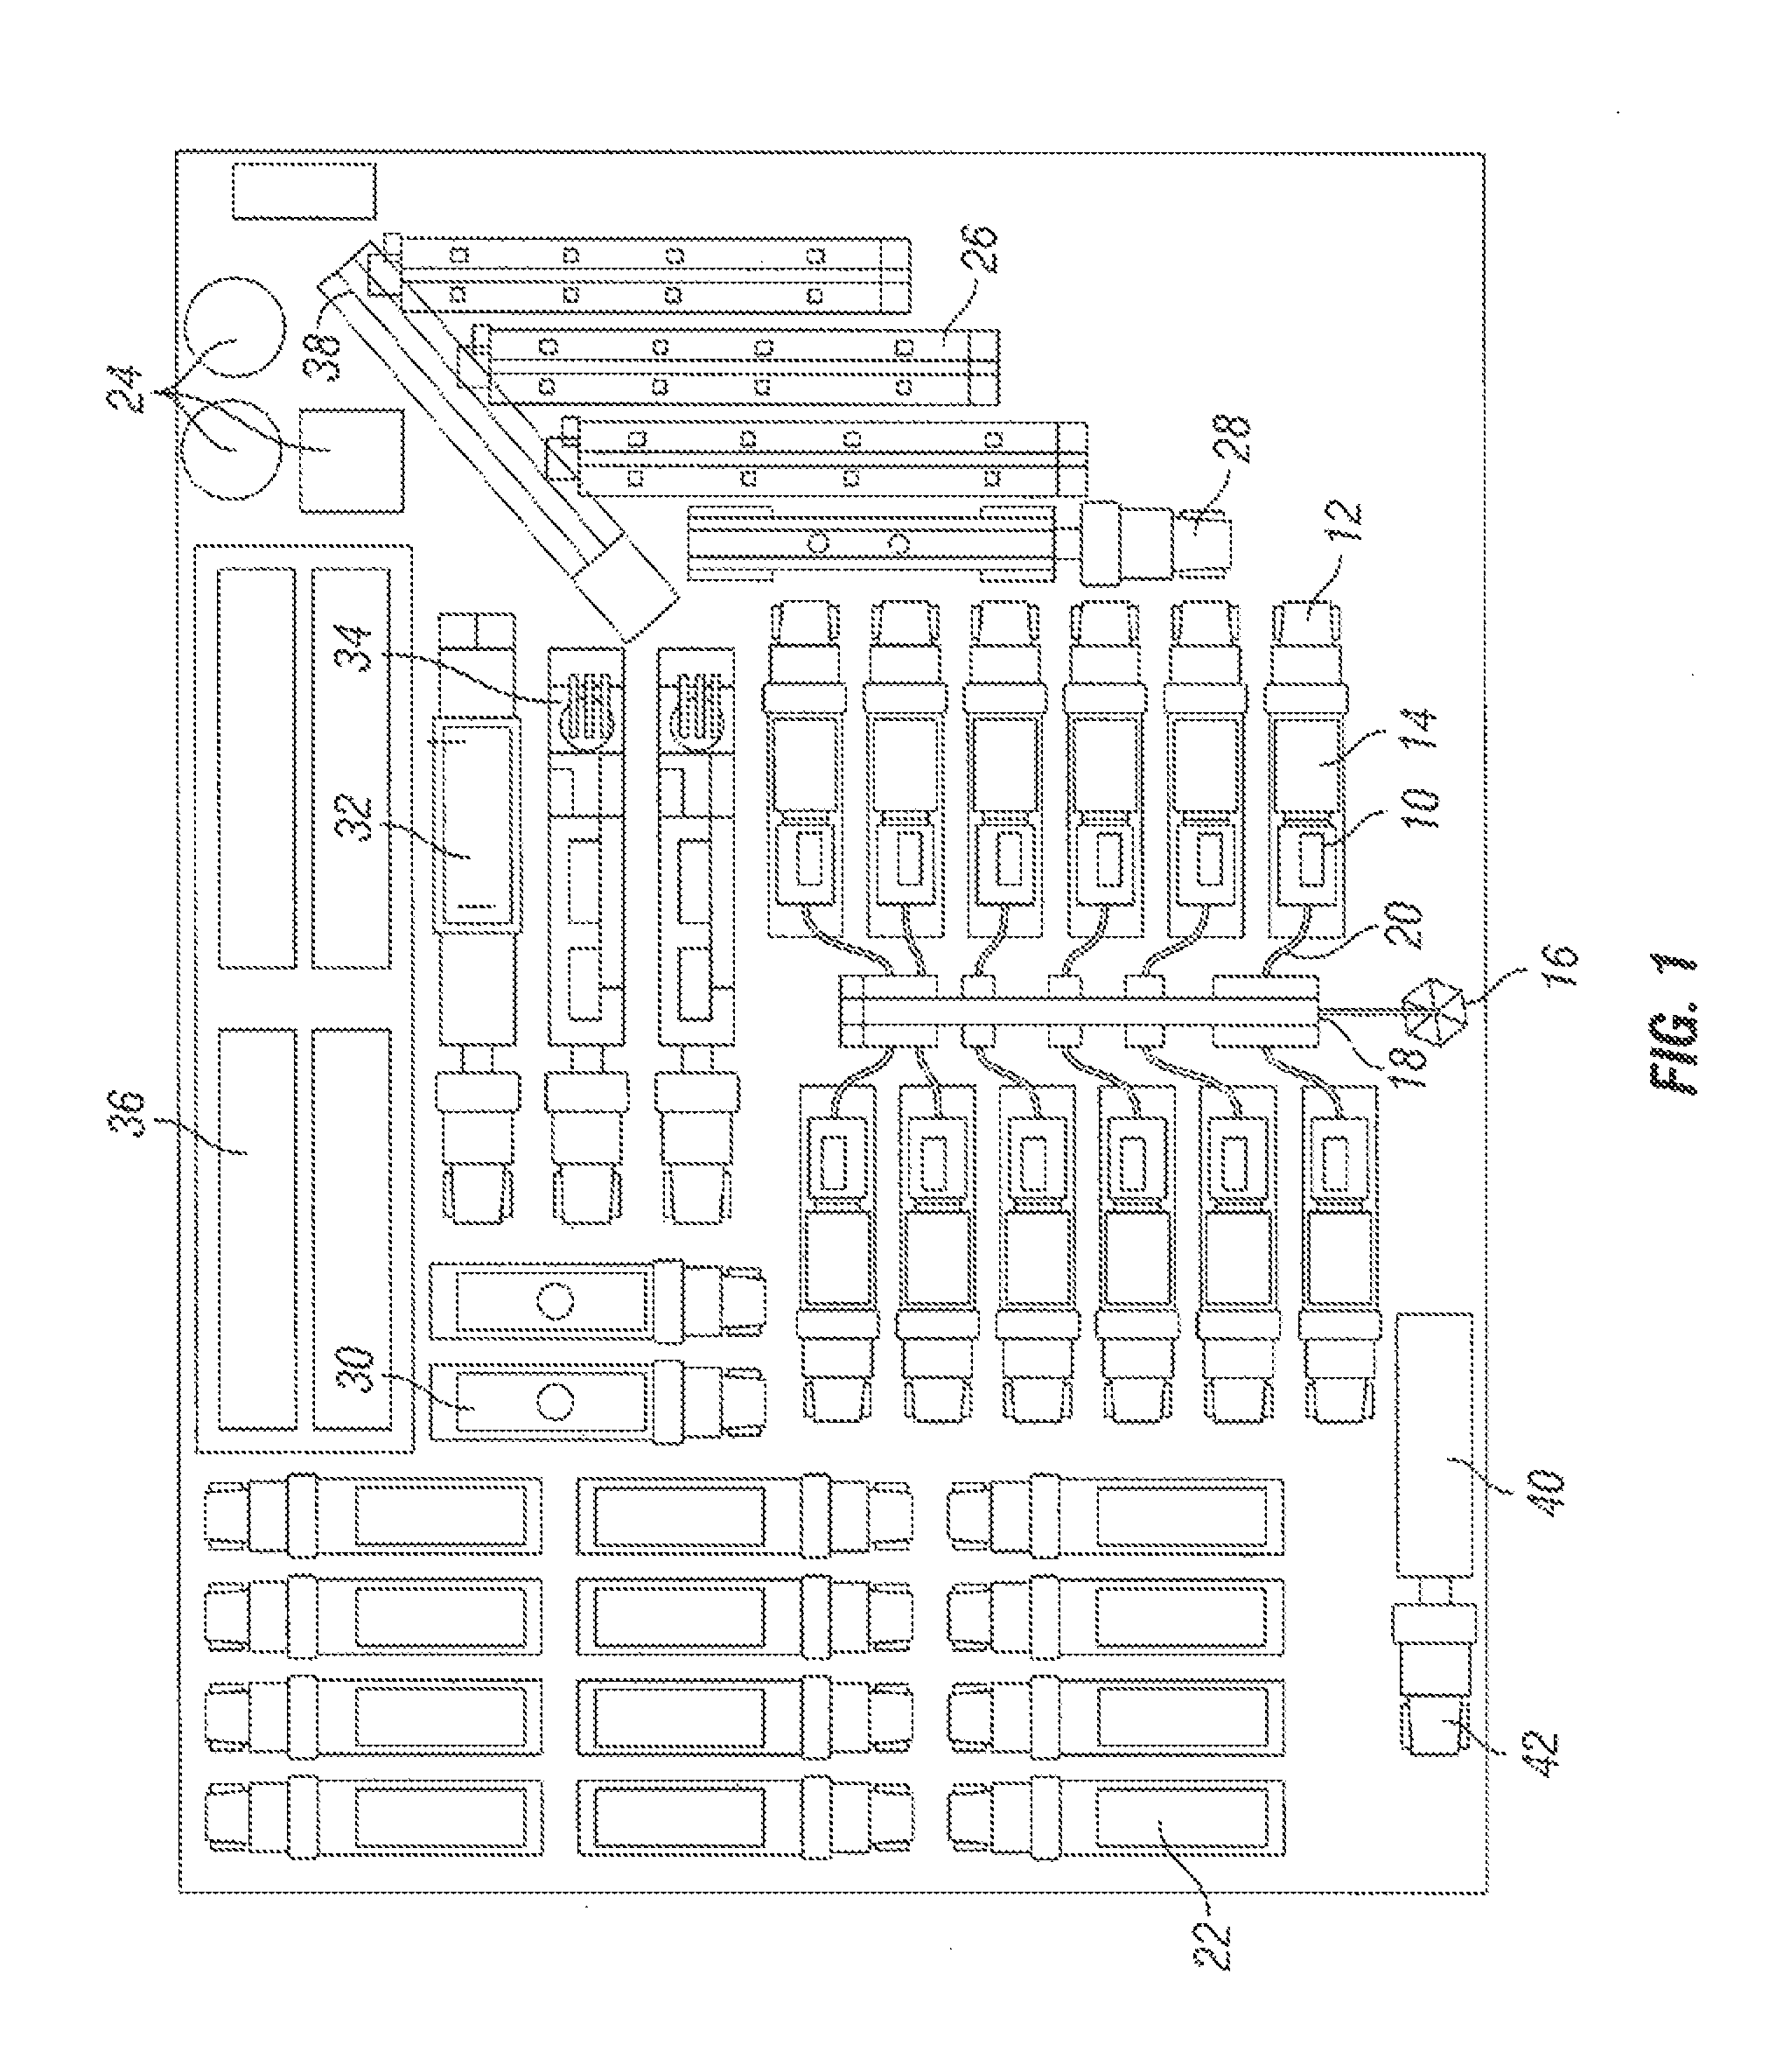 System for pumping hydraulic fracturing fluid using electric pumps